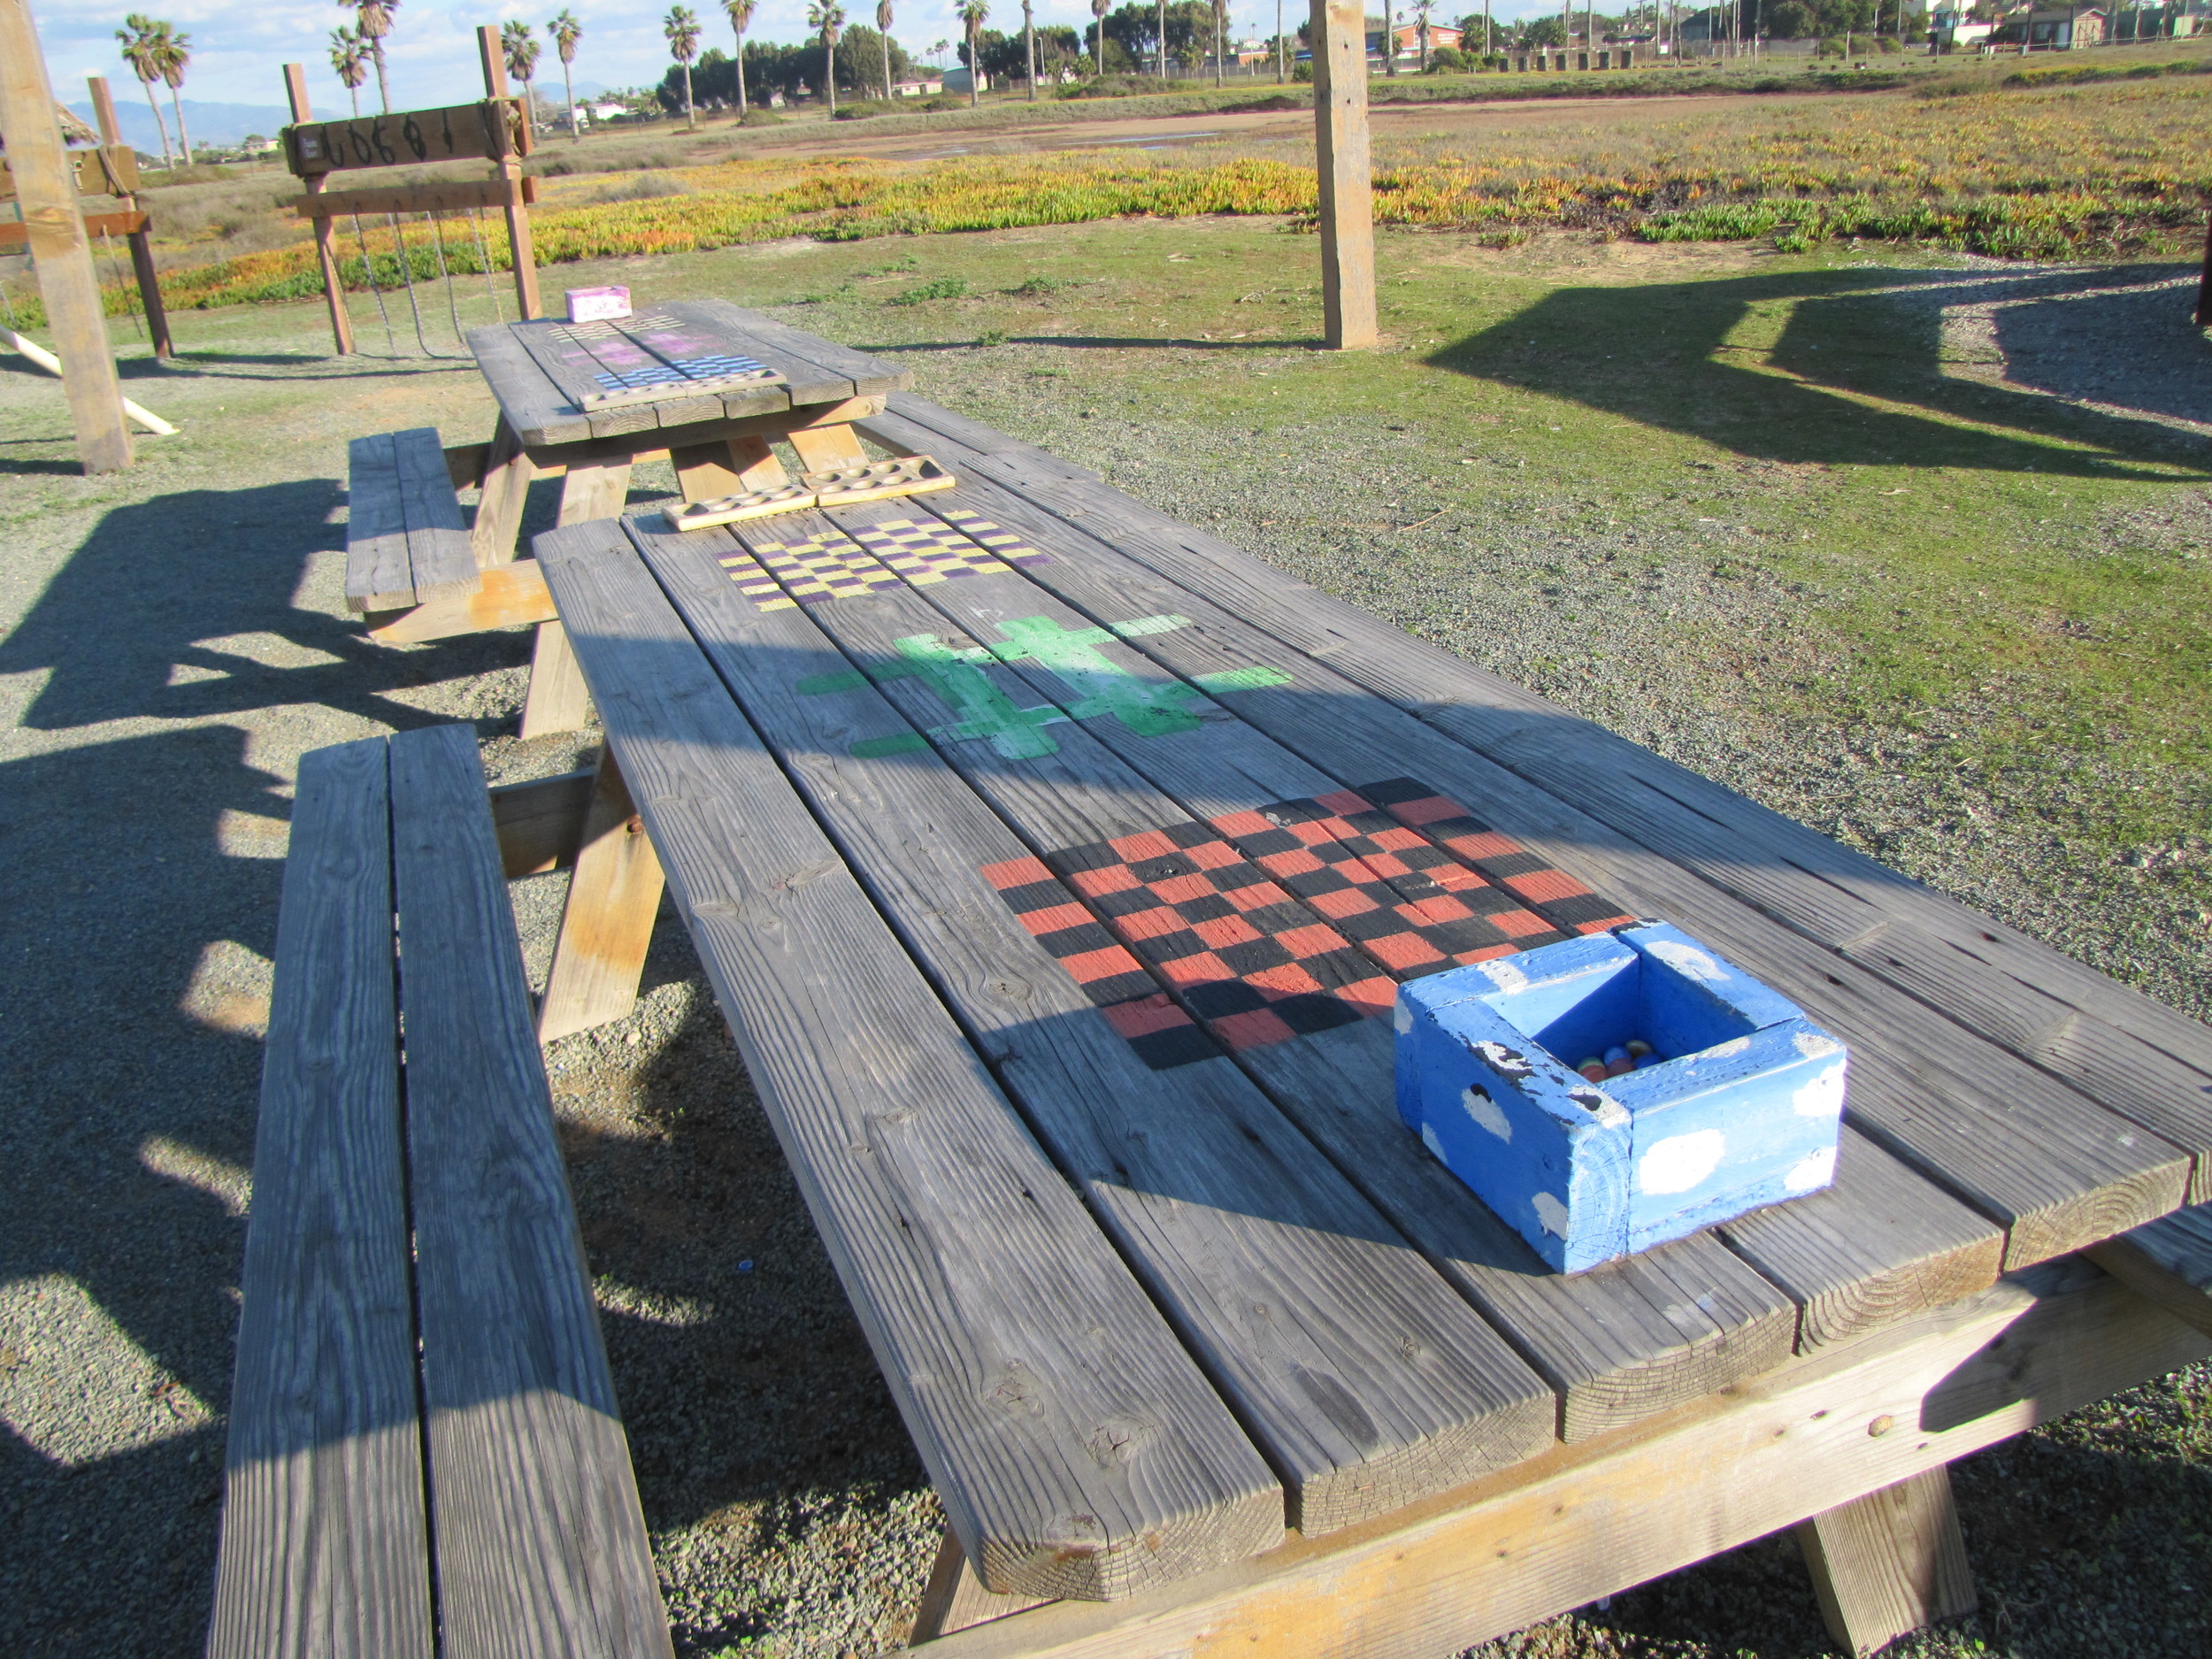 Picnic Table Games Camp Surf